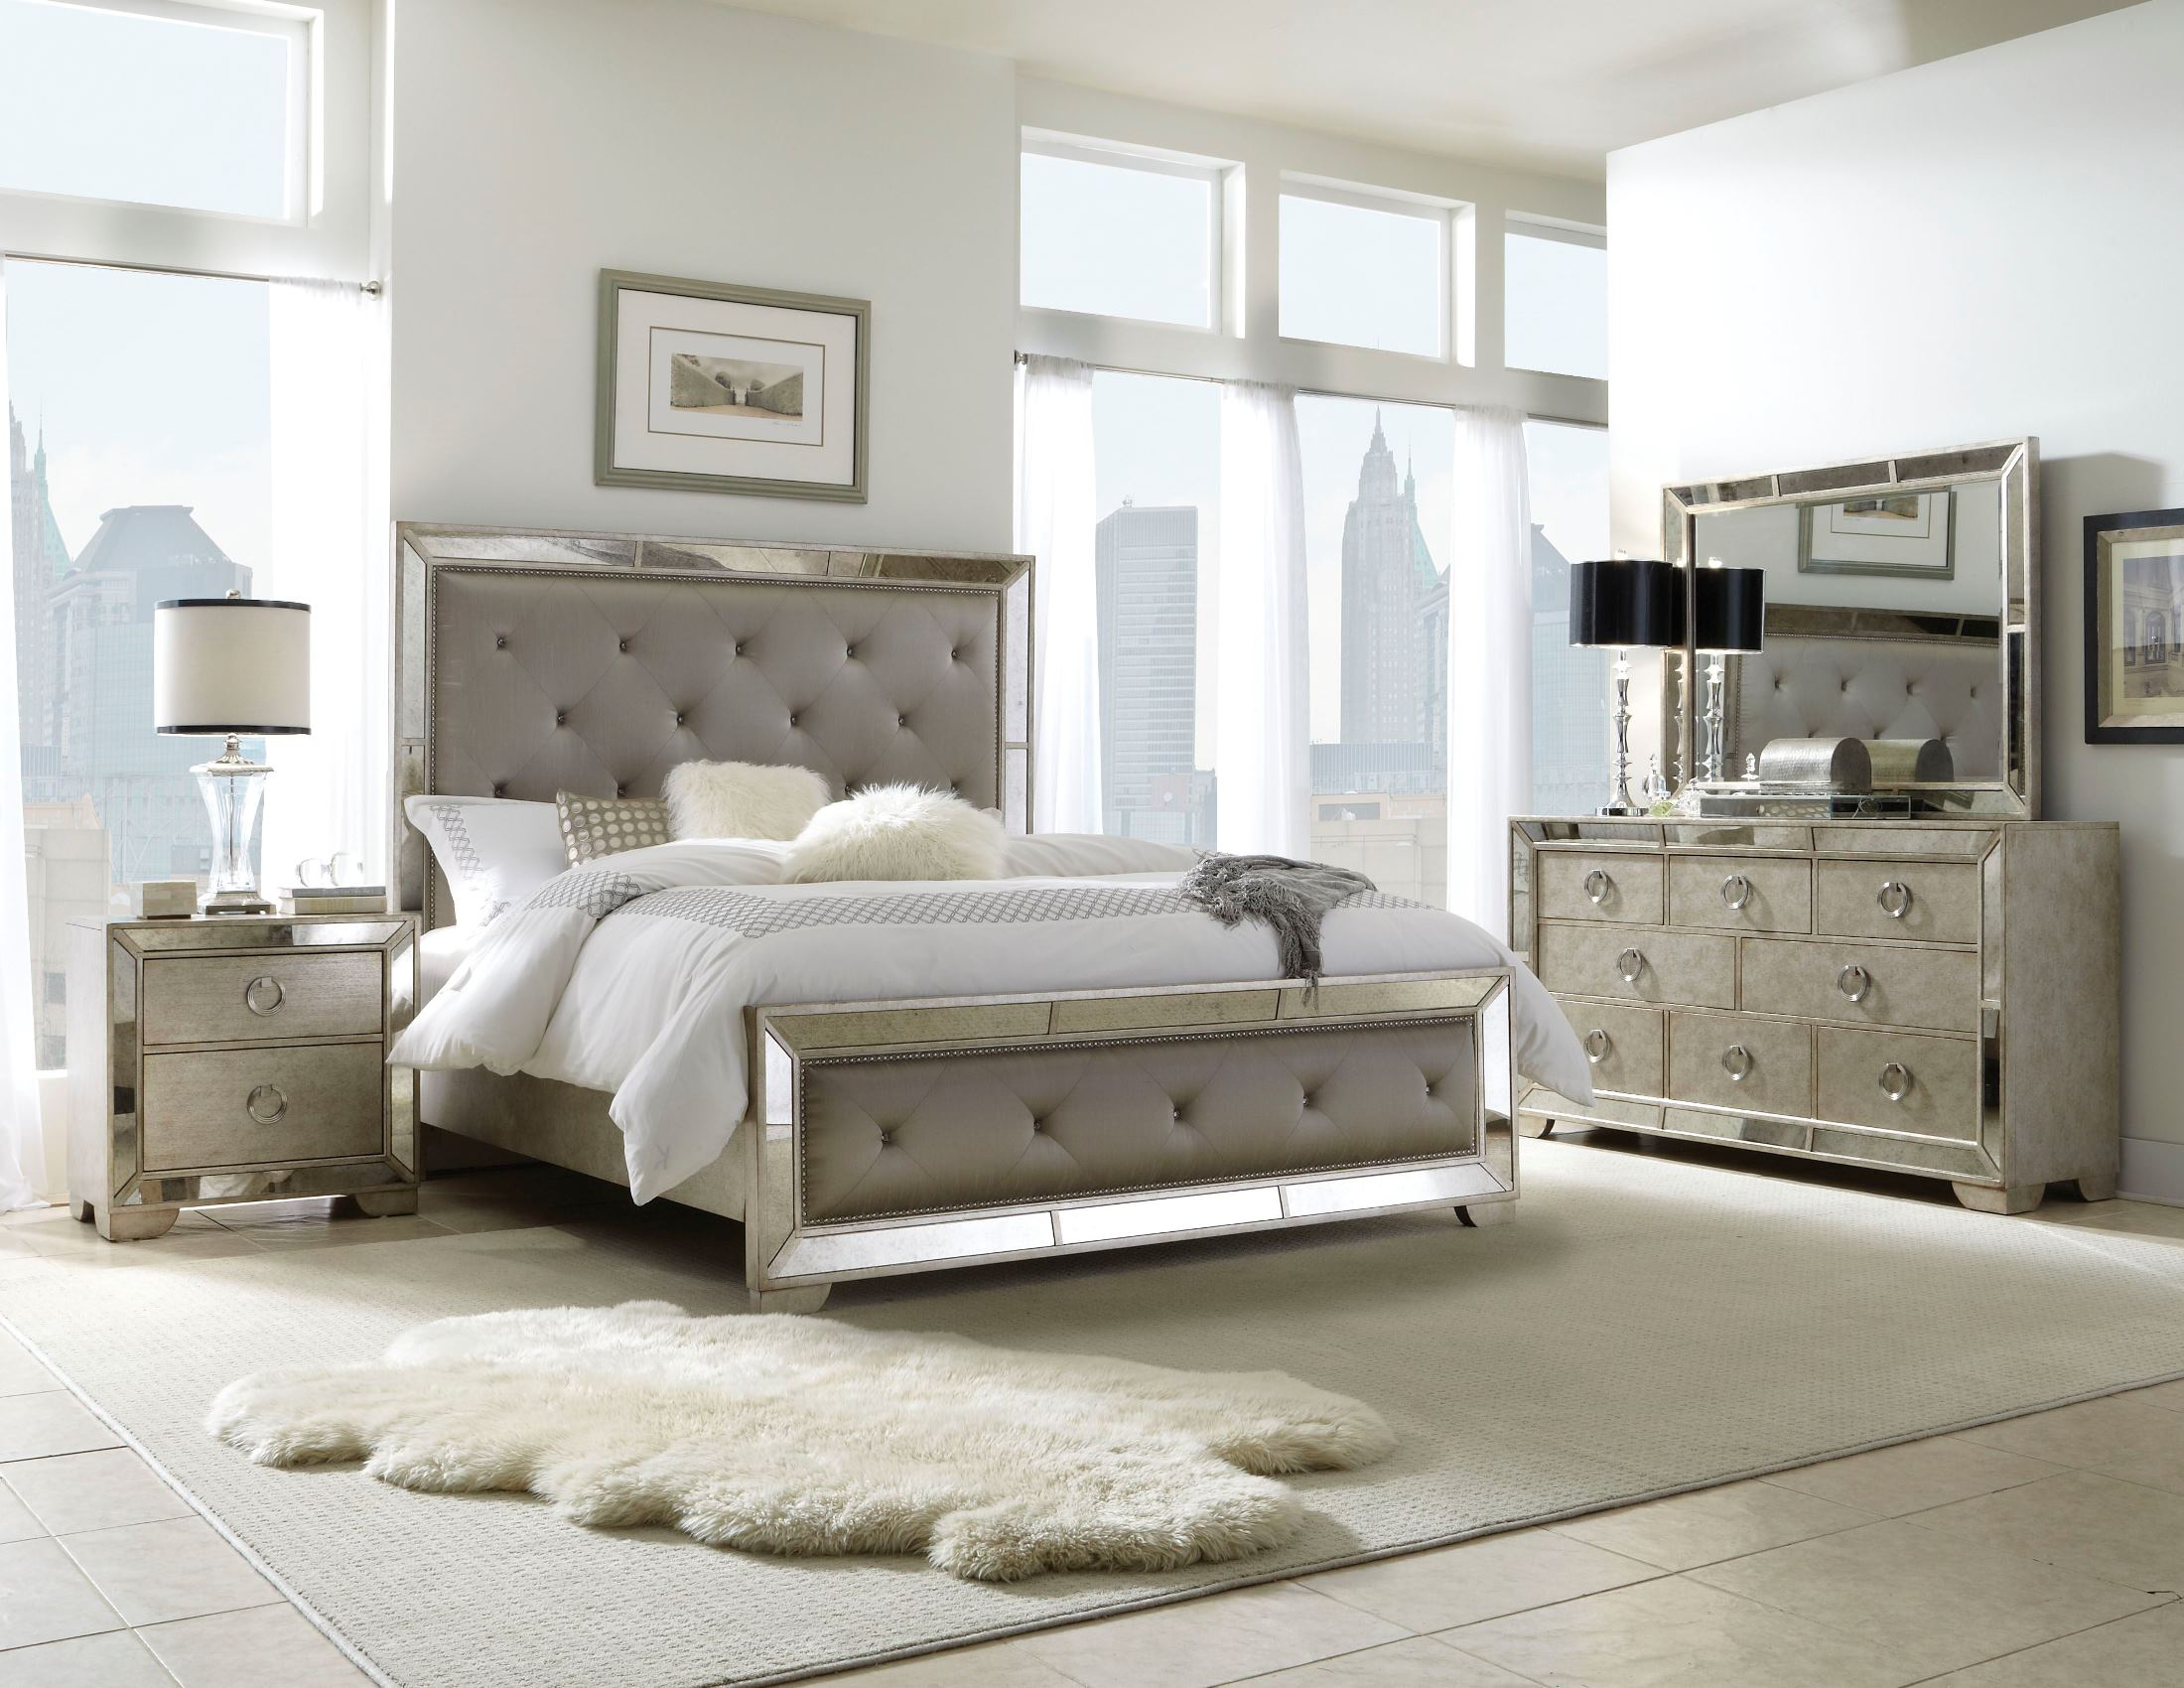 ailey king bedroom furniture